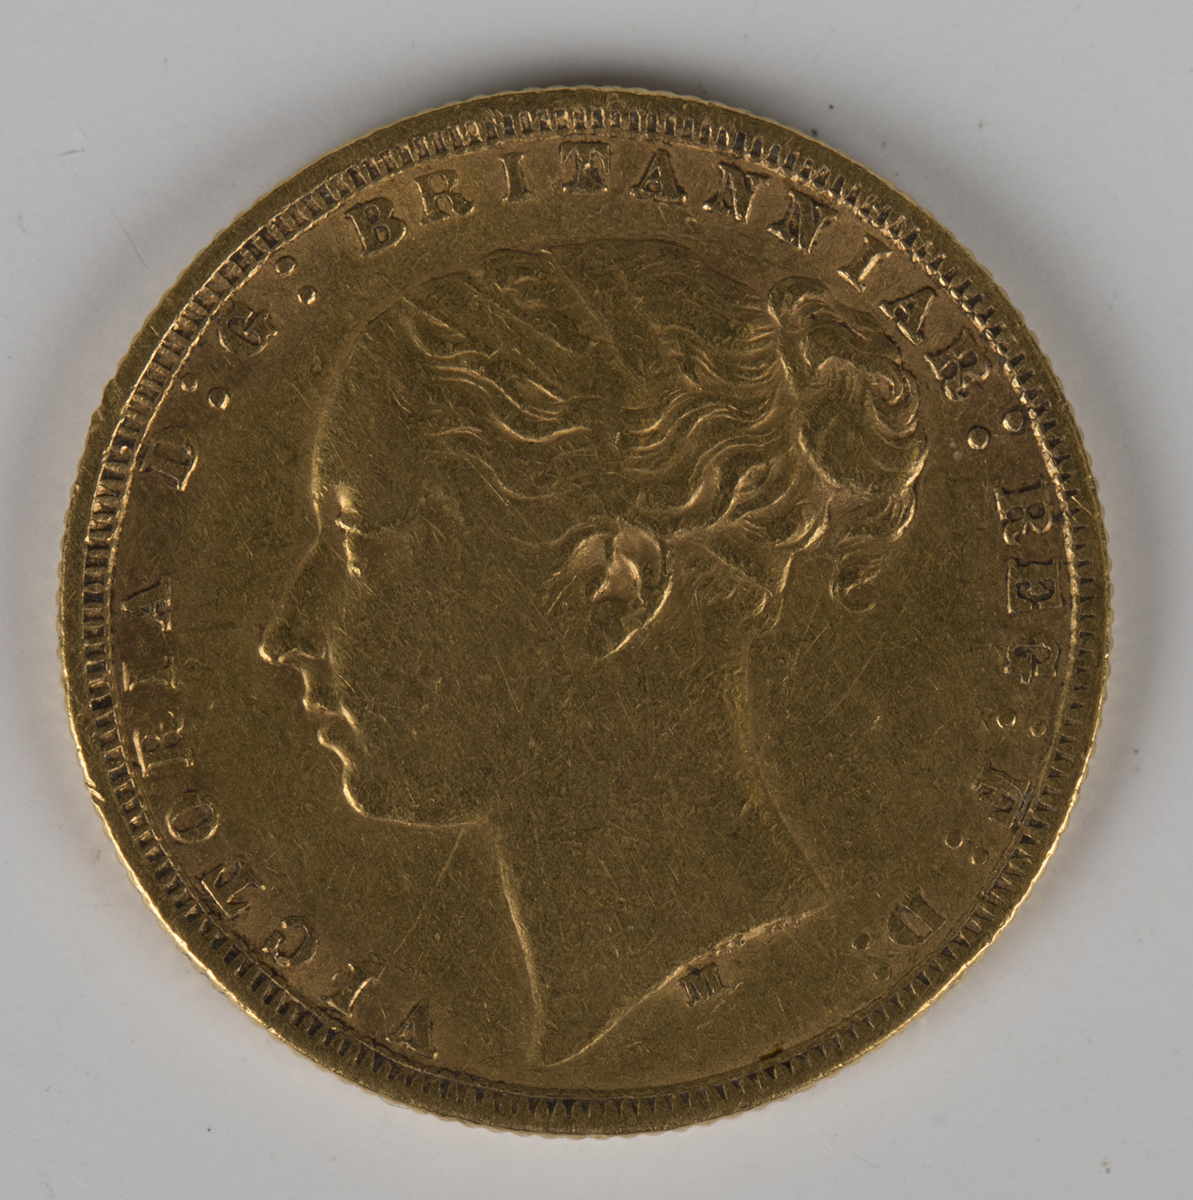 A Victoria Young Head sovereign 1876M.Buyer’s Premium 29.4% (including VAT @ 20%) of the hammer